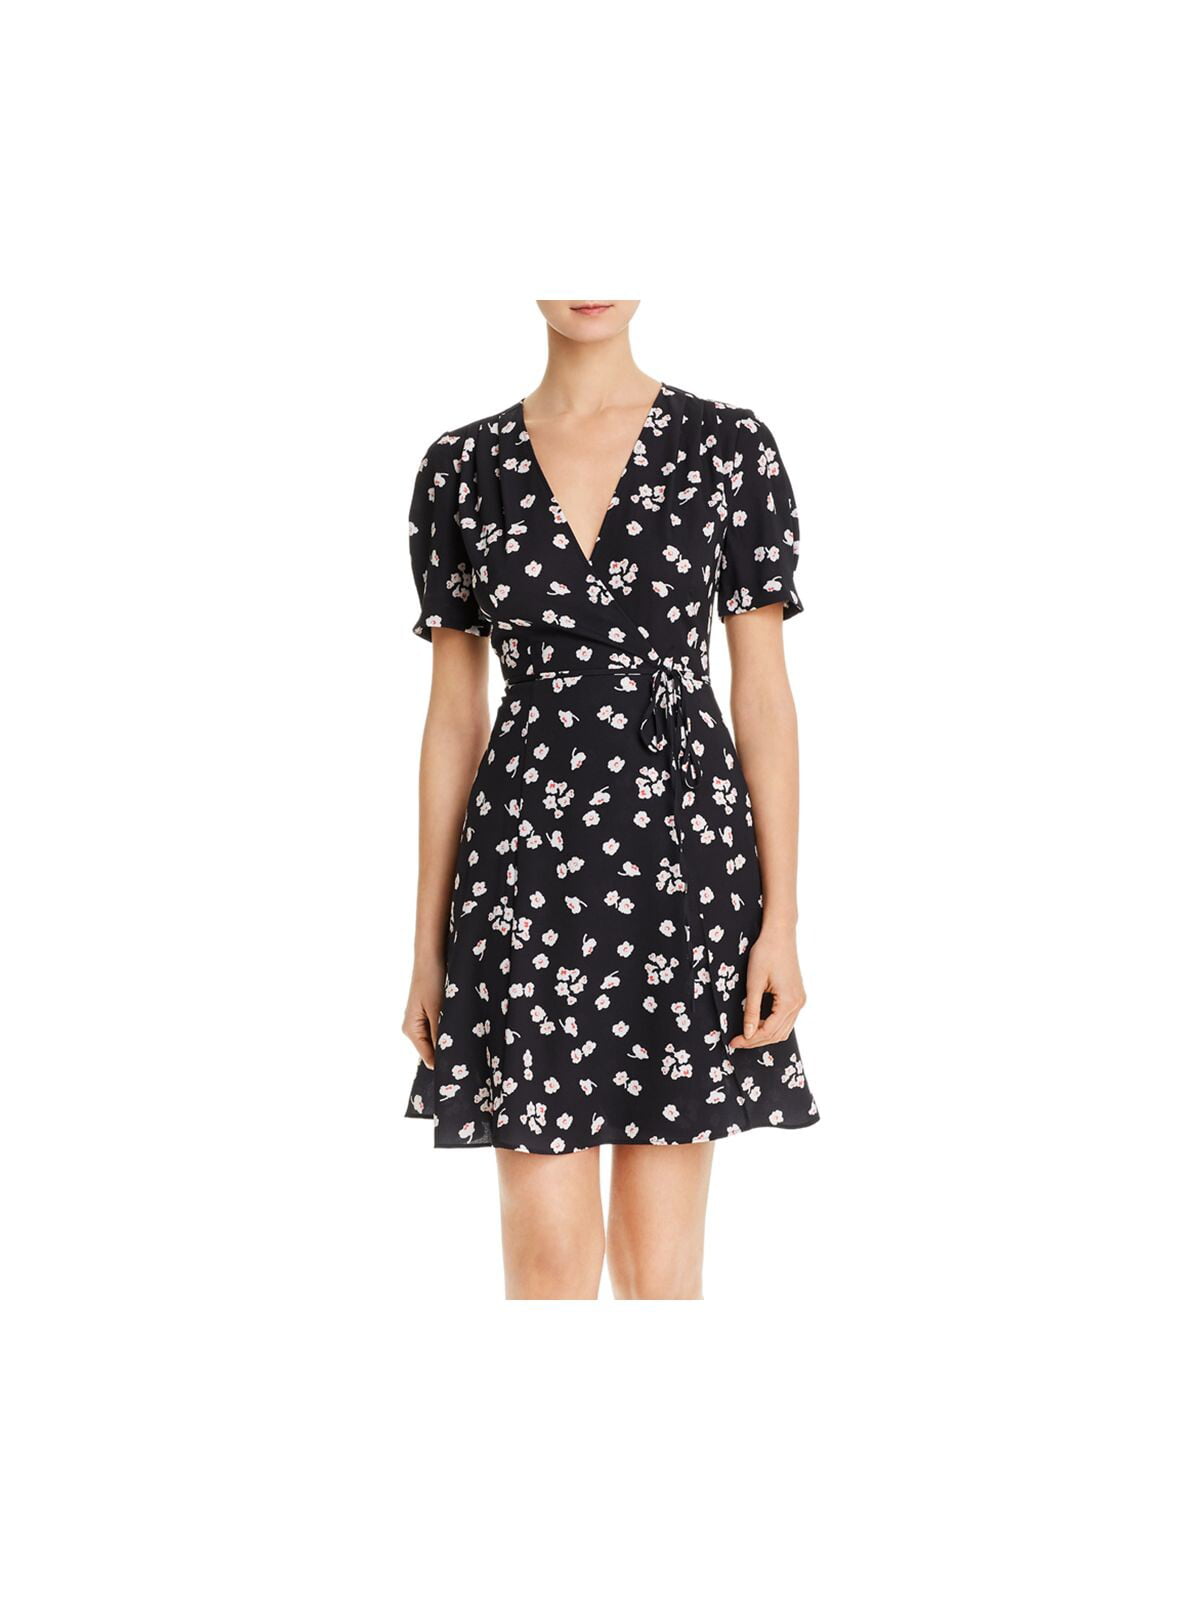 French Connection Womens Attela Pleated Floral Wrap Dress Navy 2 -  Walmart.com